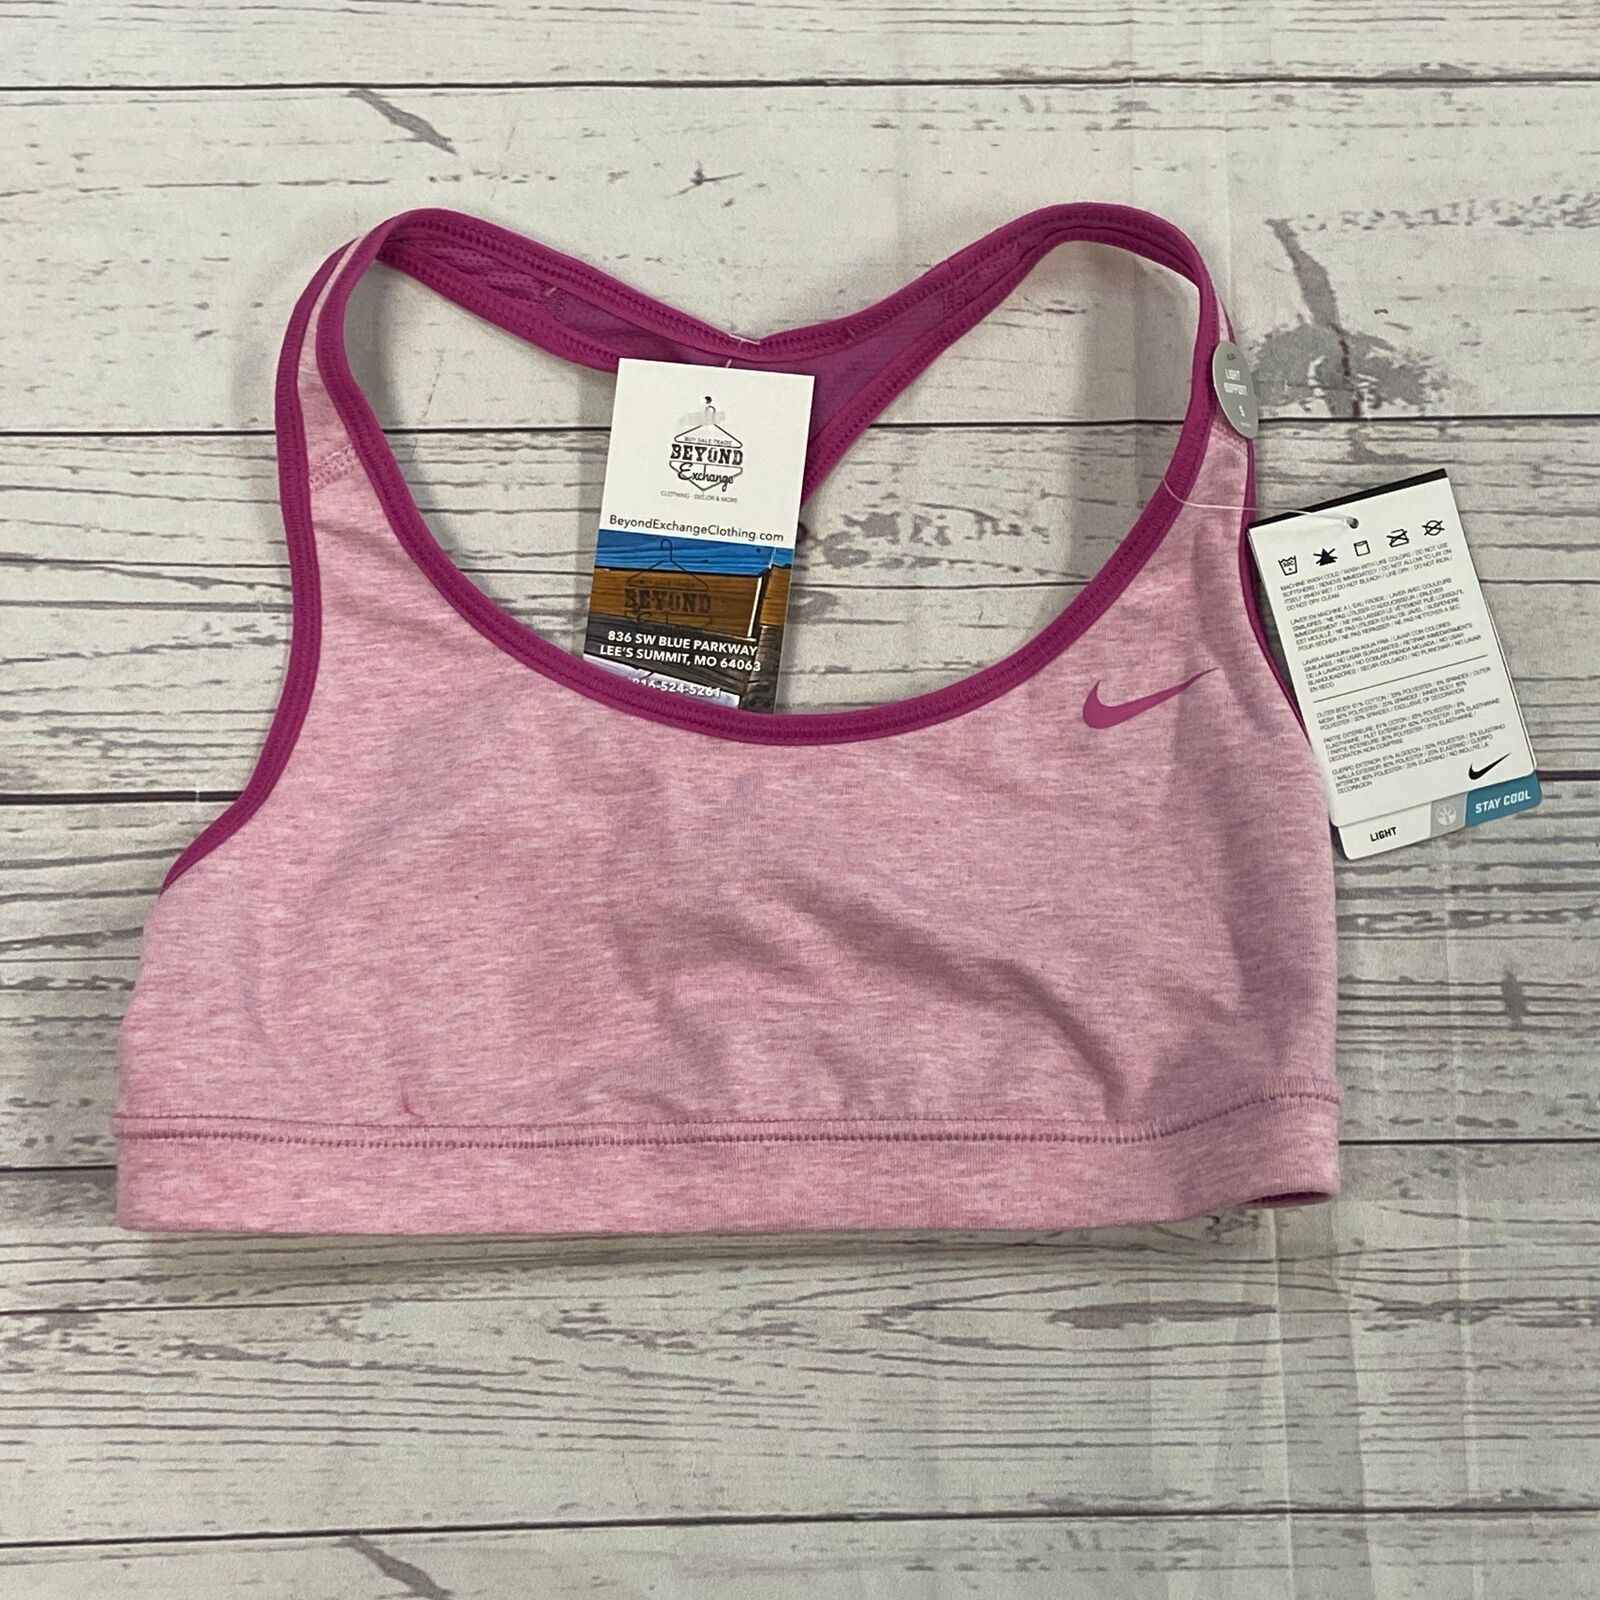 Nike Dri-Fit Sports Bra Small Pink and Black Indy Light Support